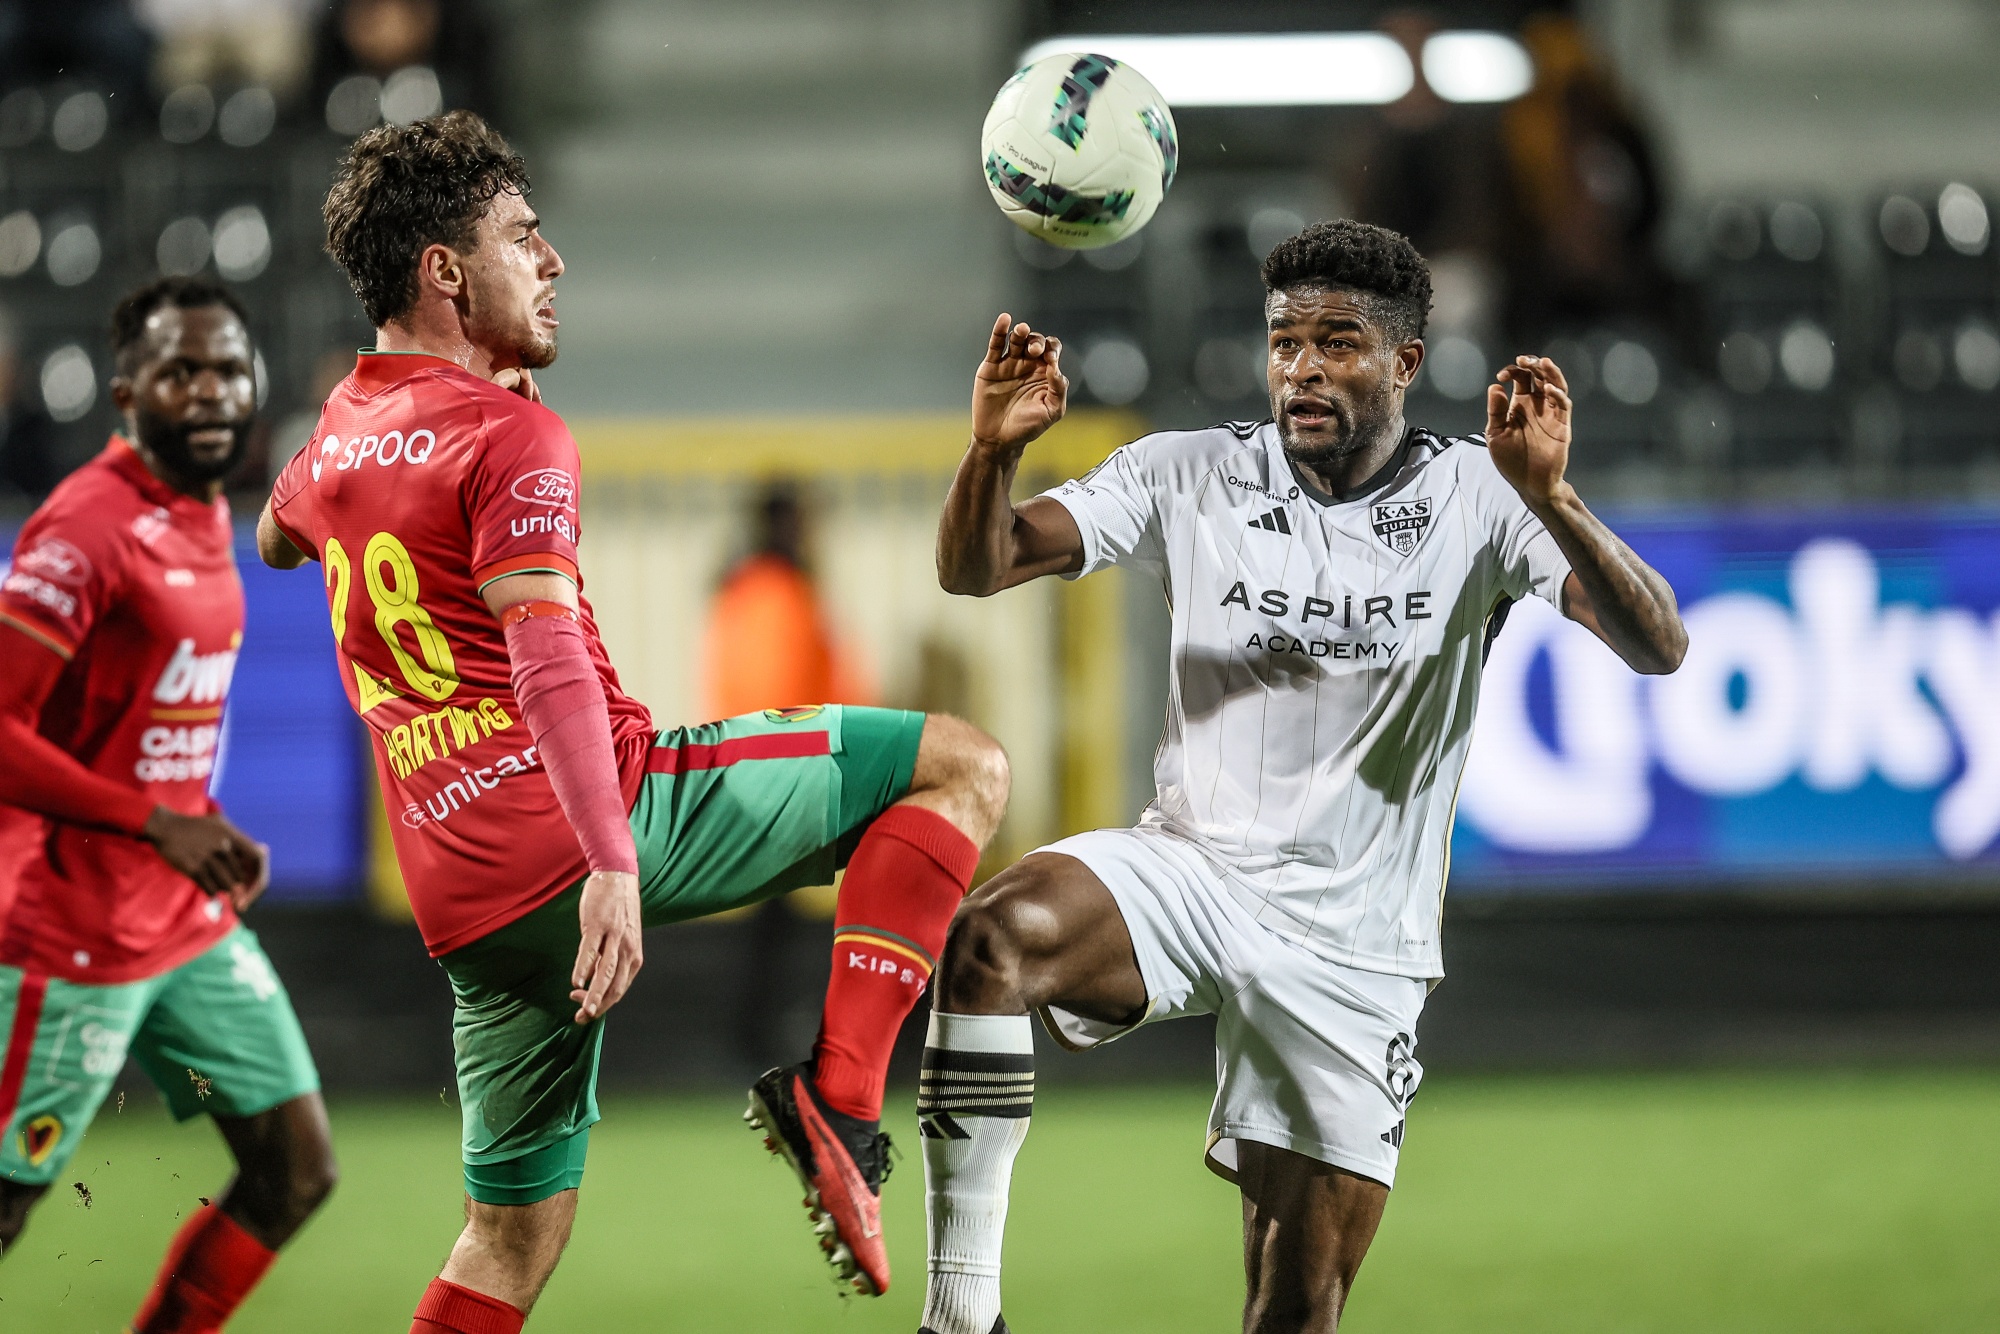 Oostende's Luis Hartwig and Eupen's Brandon Baiye fight for the ball during a Croky Cup 1/16 final game between KAS Eupen and KV Oostende, in Eupen, Tuesday 31 October 2023. BELGA PHOTO BRUNO FAHY